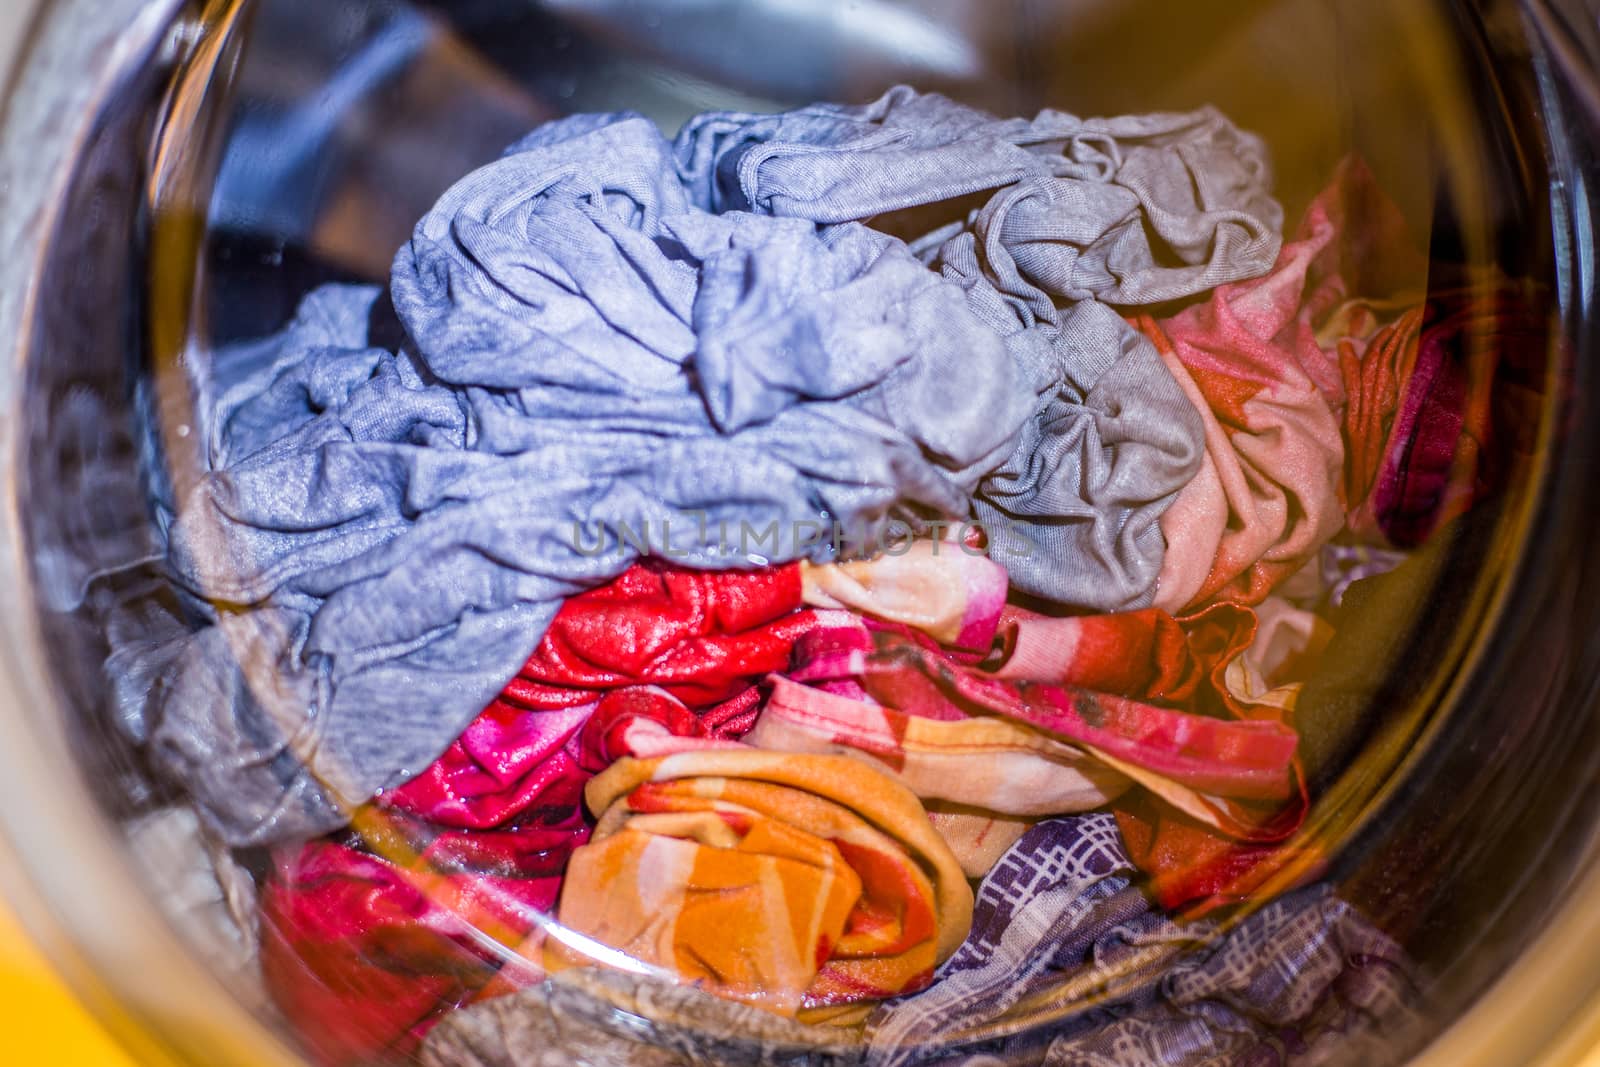 a close view of domestic washing machine at work with wet colored cloth inside.